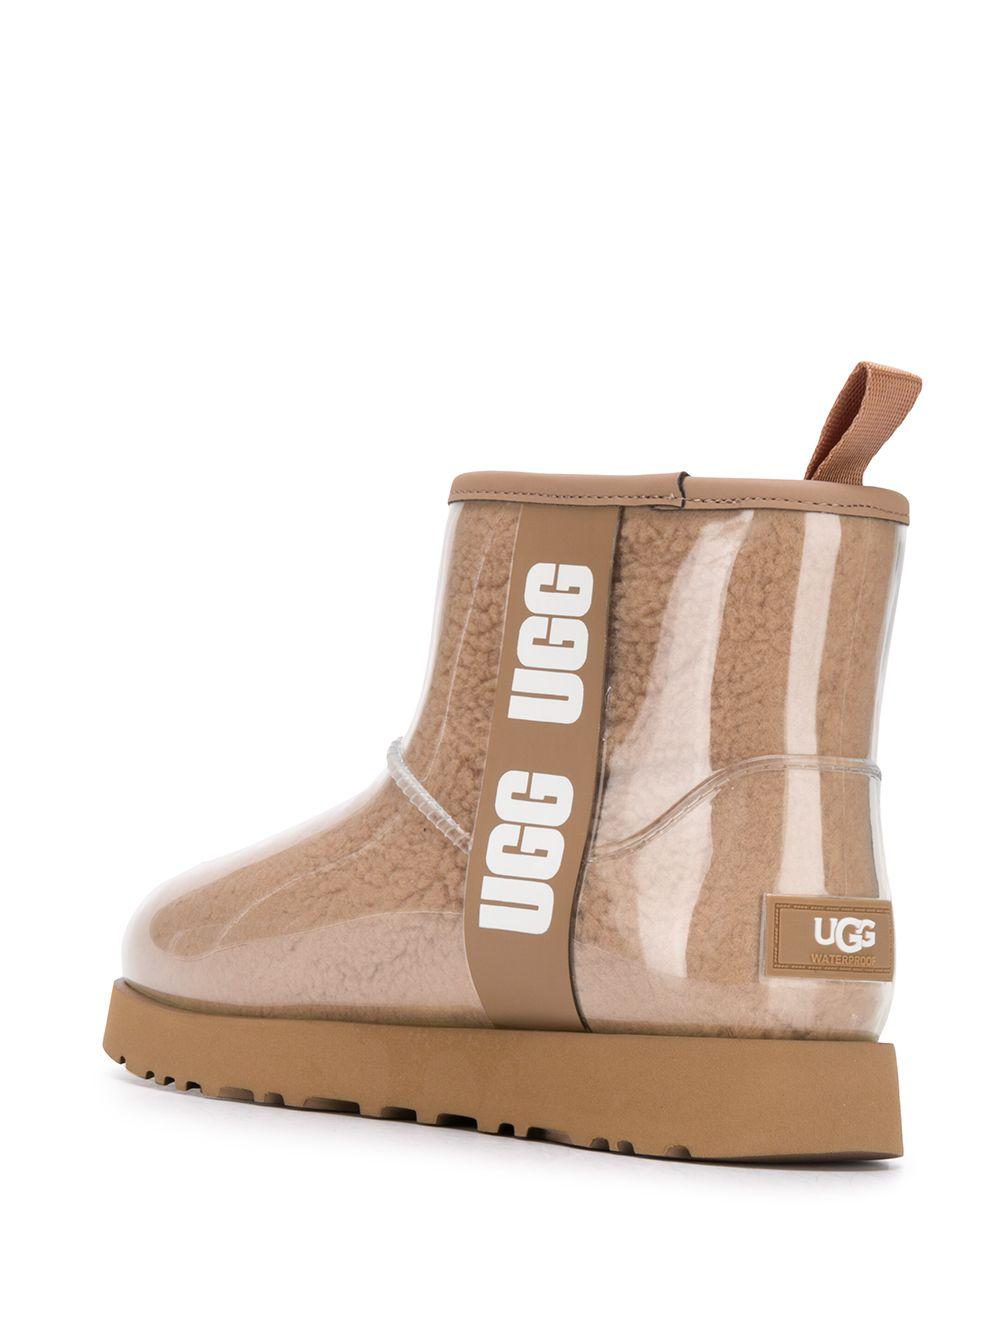 UGG Mini Classic Clear Boots in Beige (Natural) | Lyst